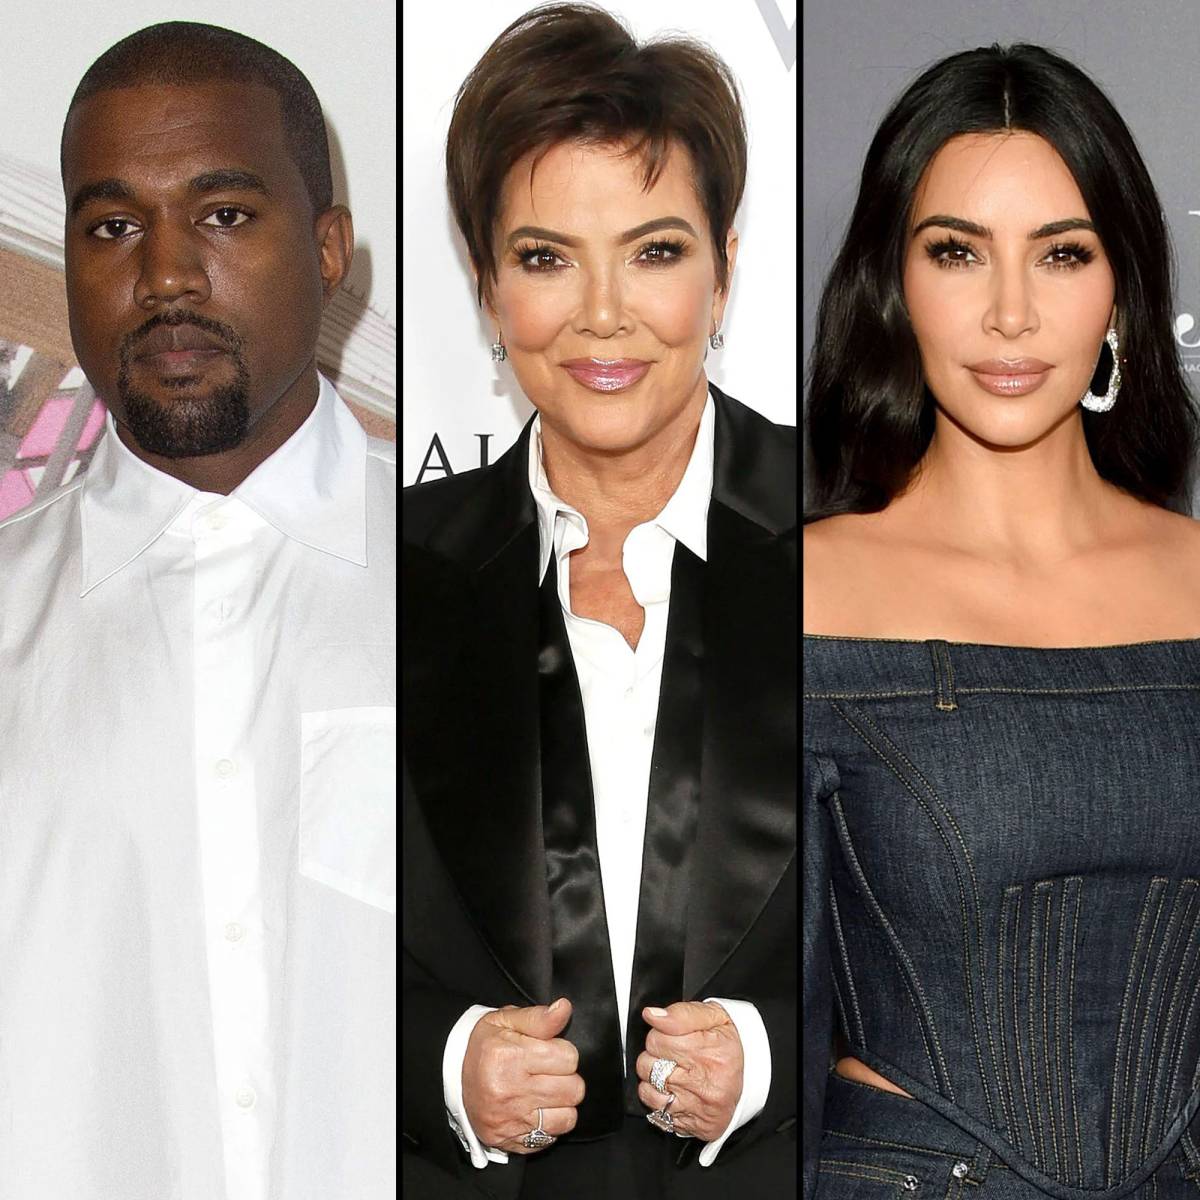 Jenner Xxx - Kanye West Calls Out Kris Jenner, Claims Porn 'Destroyed' Family